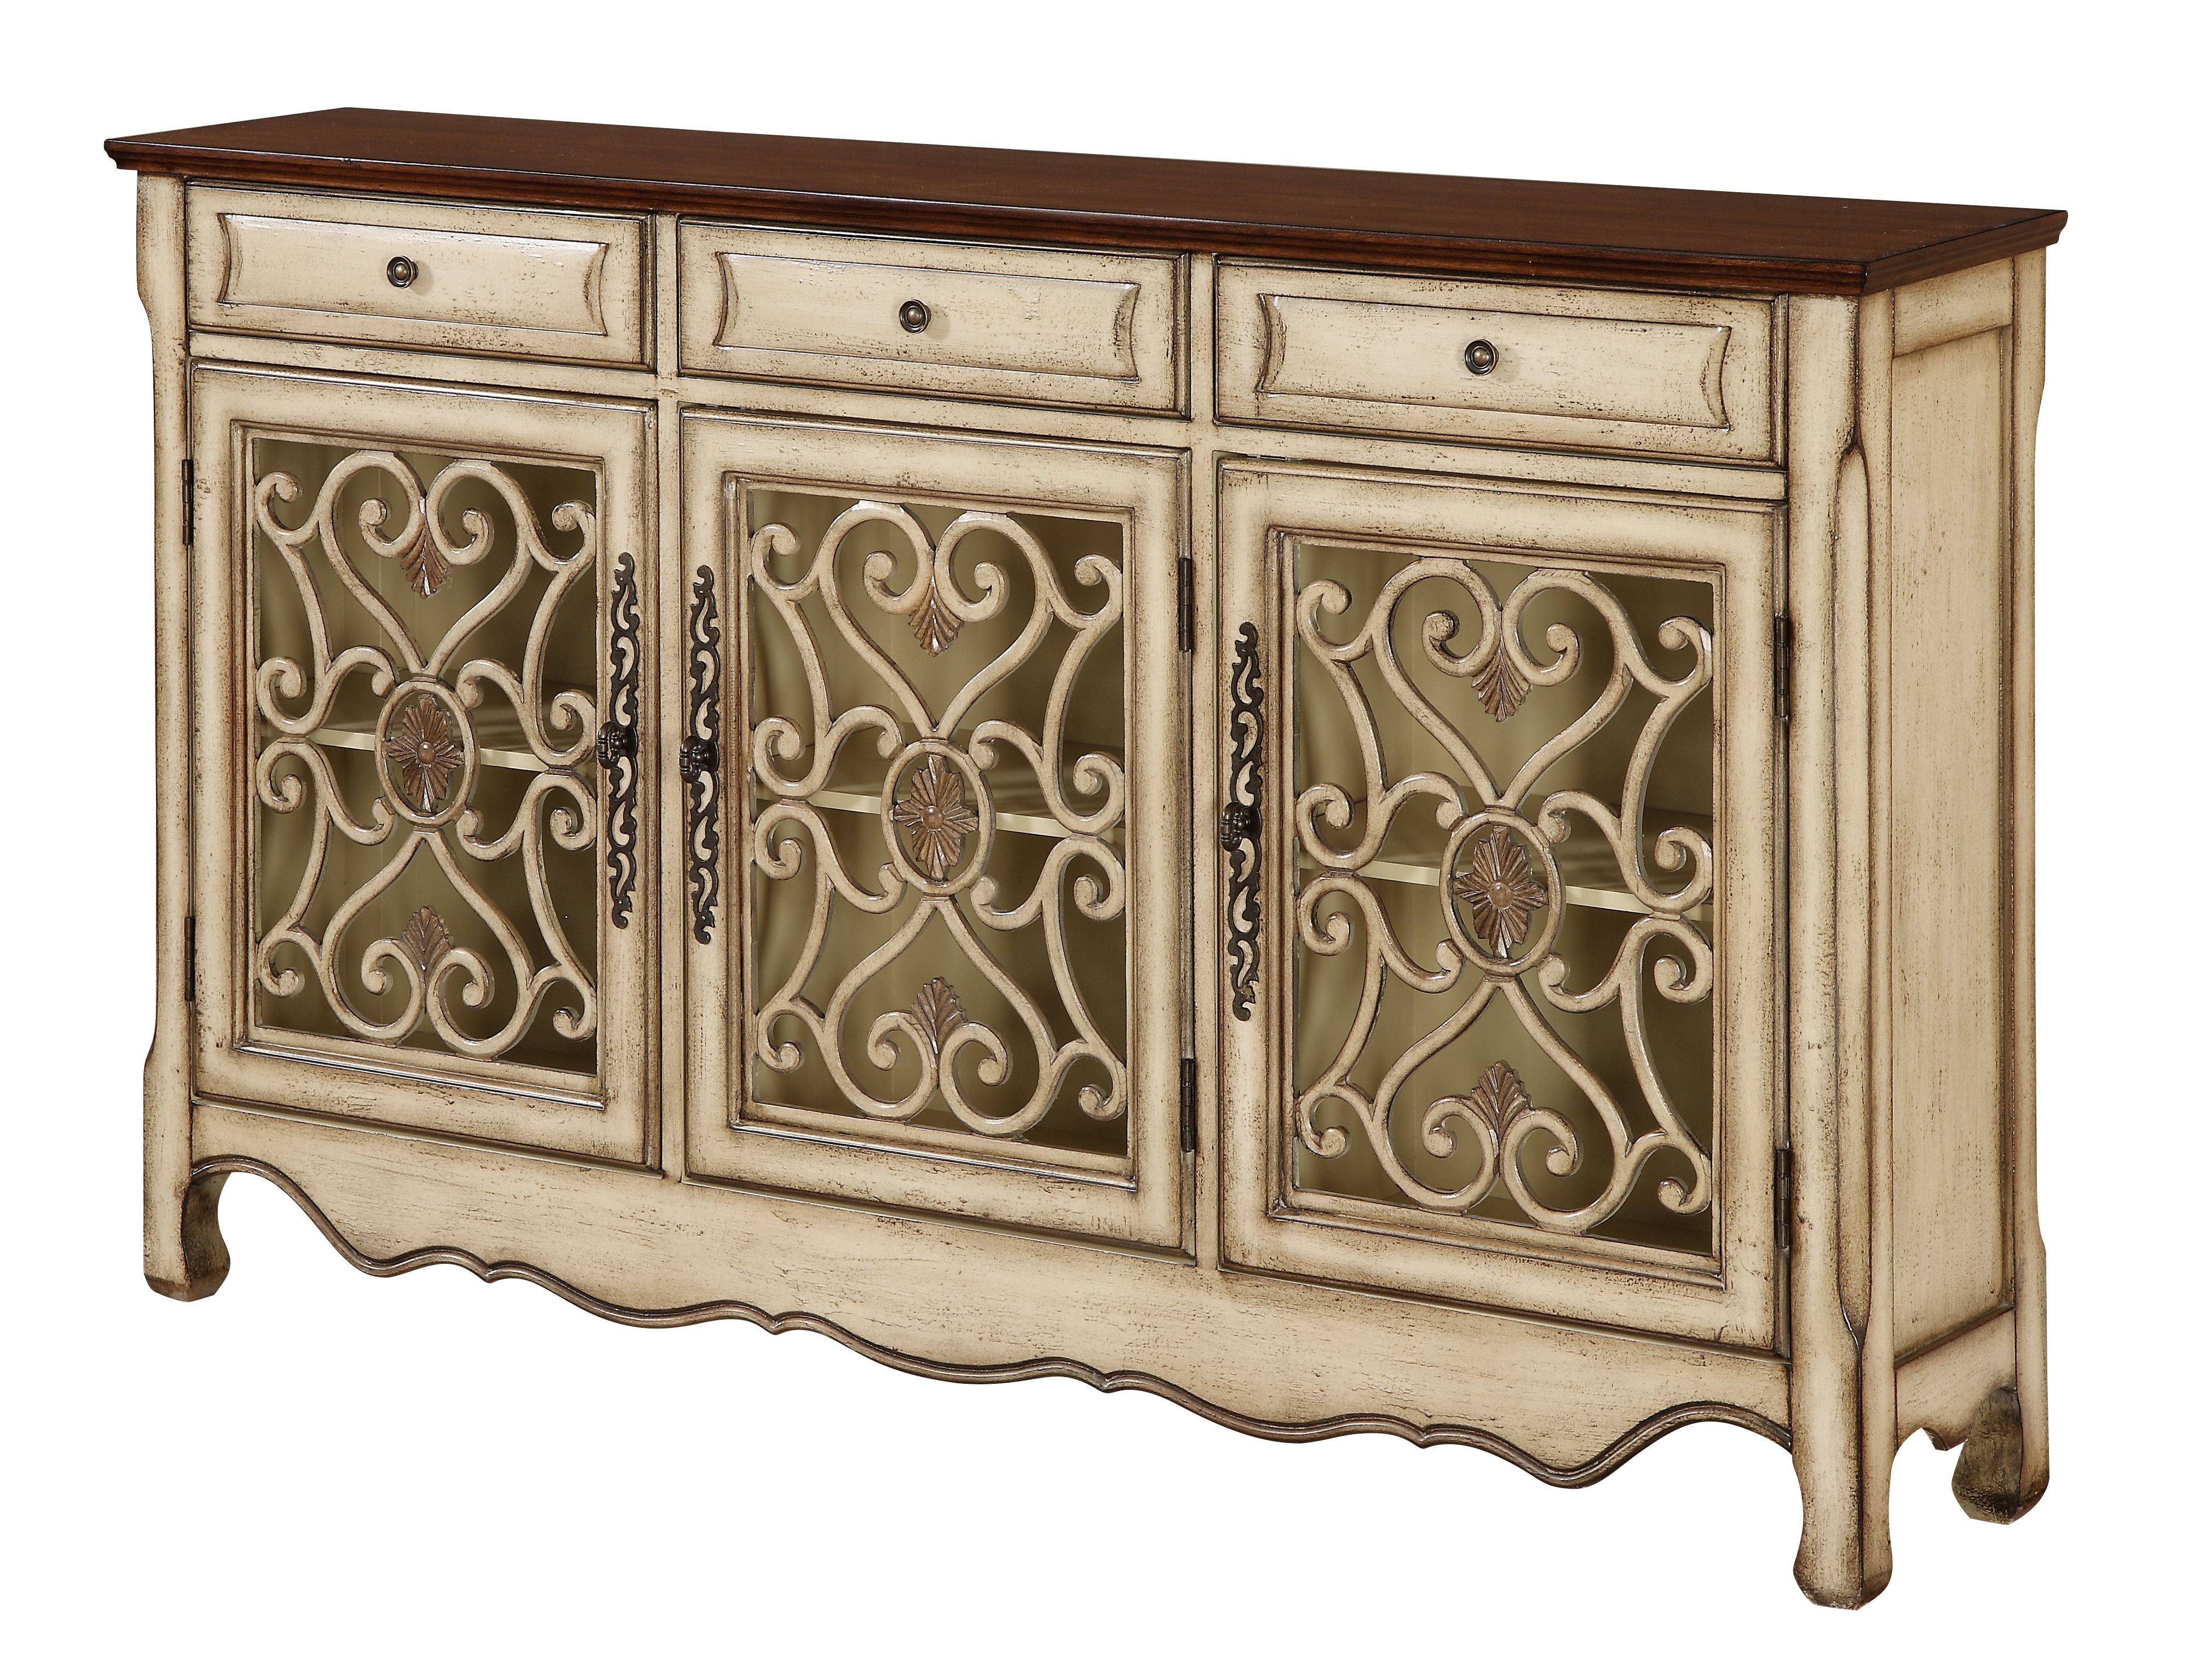 Mauzy Sideboard Intended For Most Up To Date Tiphaine Sideboards (View 13 of 20)